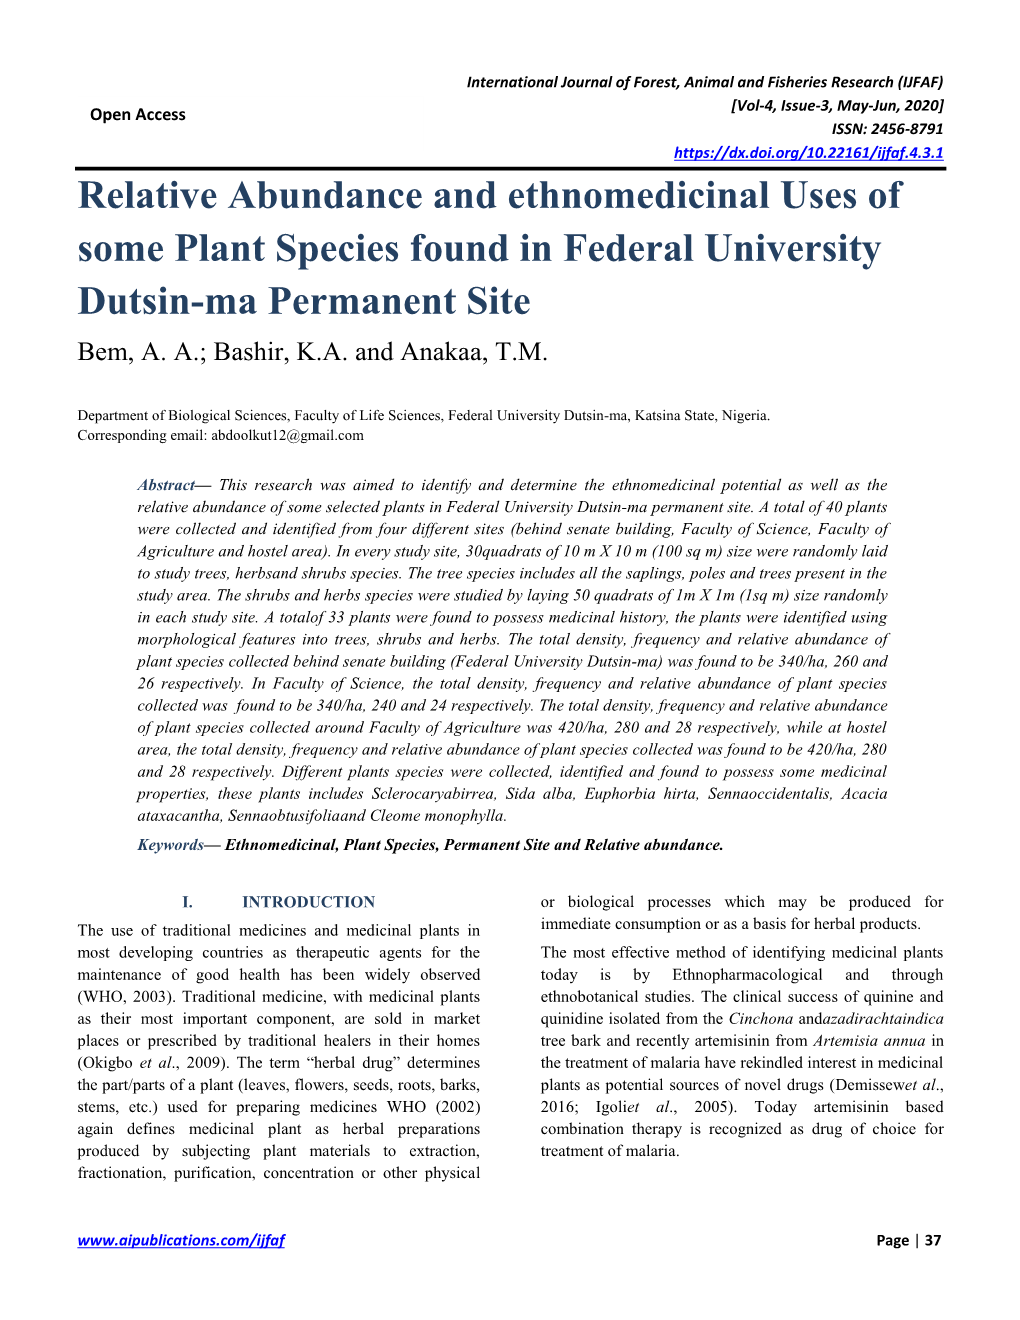 Relative Abundance and Ethnomedicinal Uses of Some Plant Species Found in Federal University Dutsin-Ma Permanent Site Bem, A